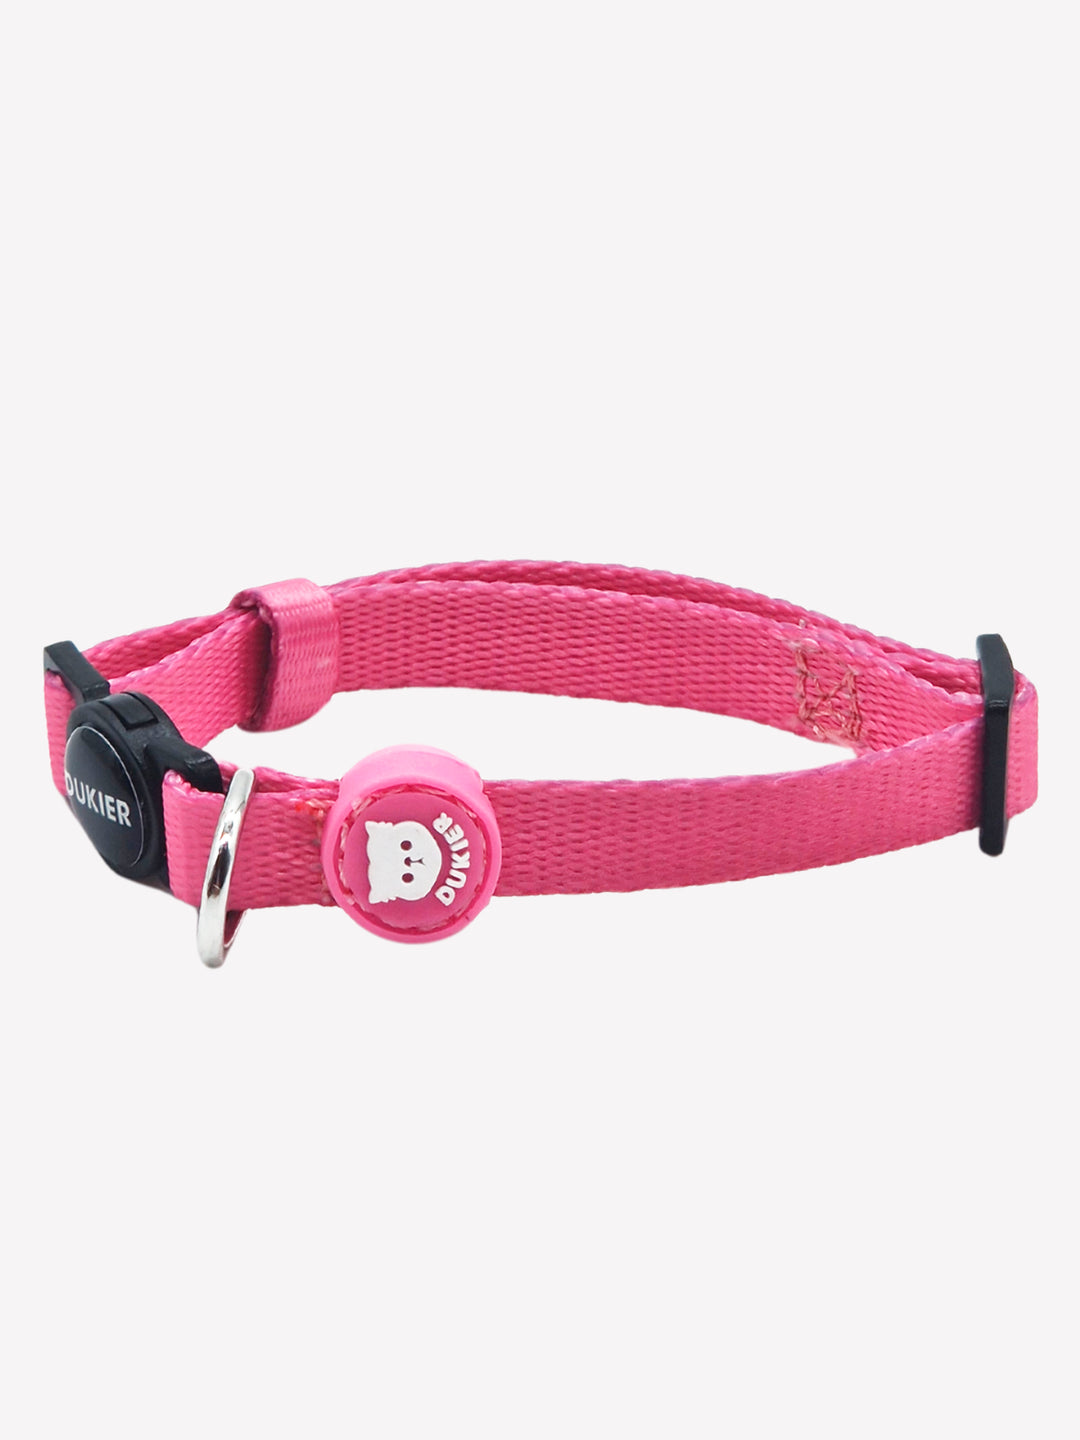 COLLIER PINK POUR CHAT